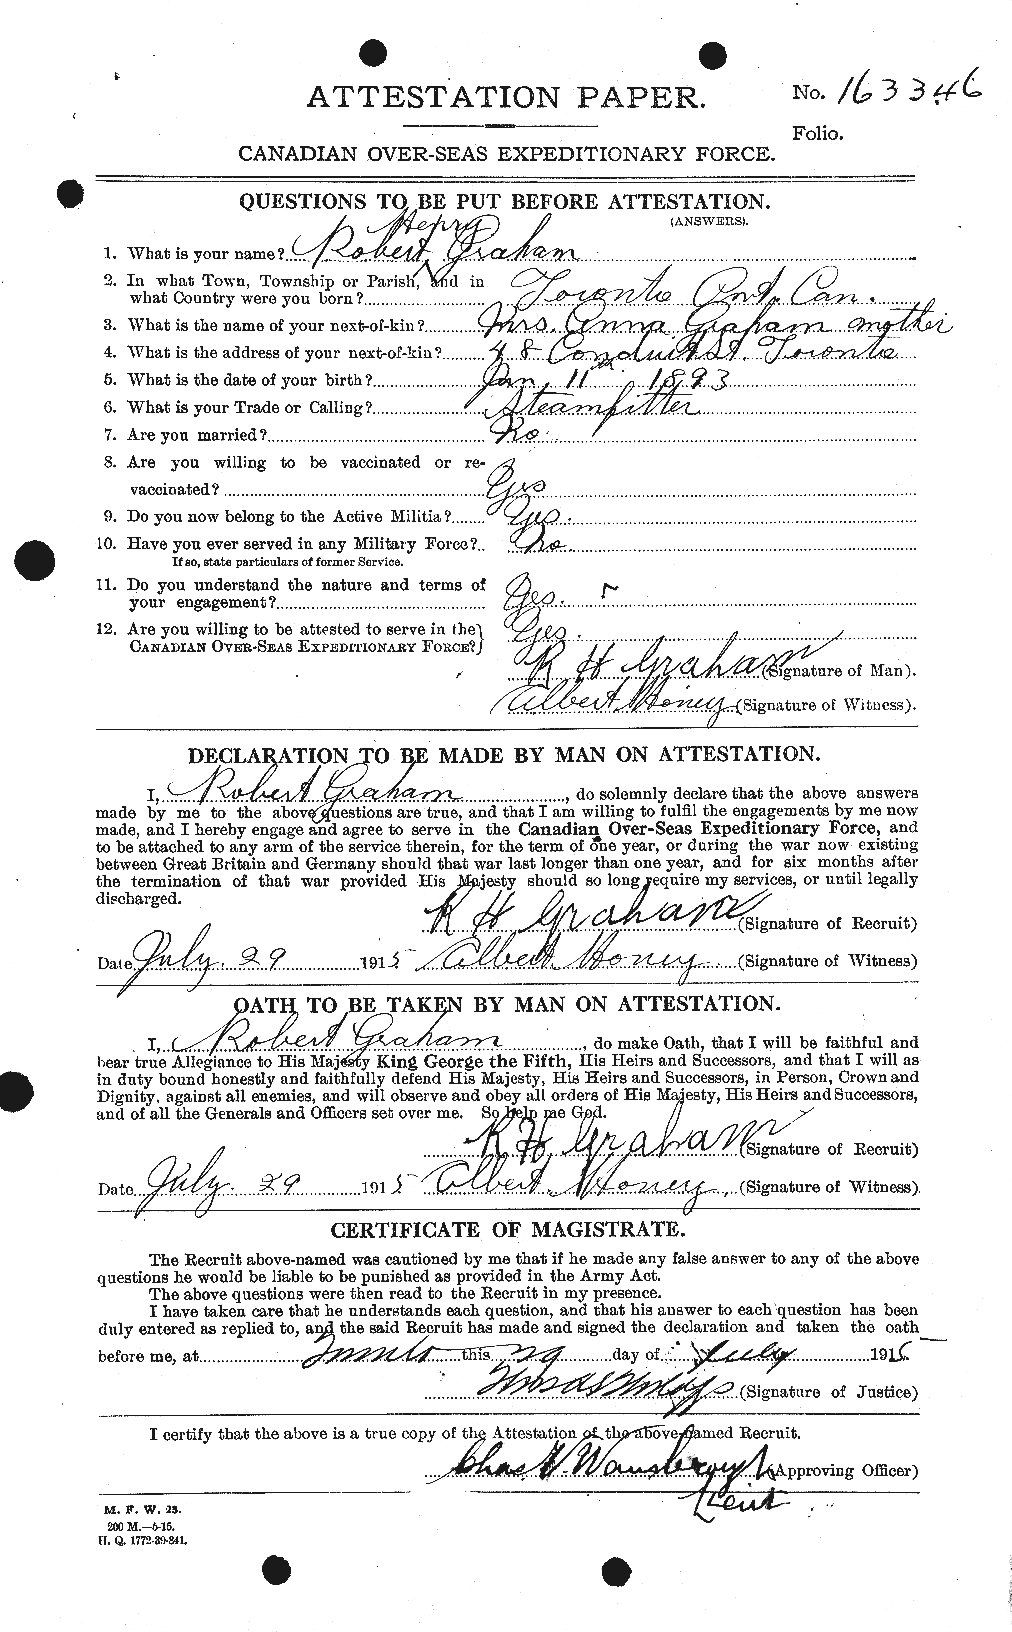 Personnel Records of the First World War - CEF 359404a